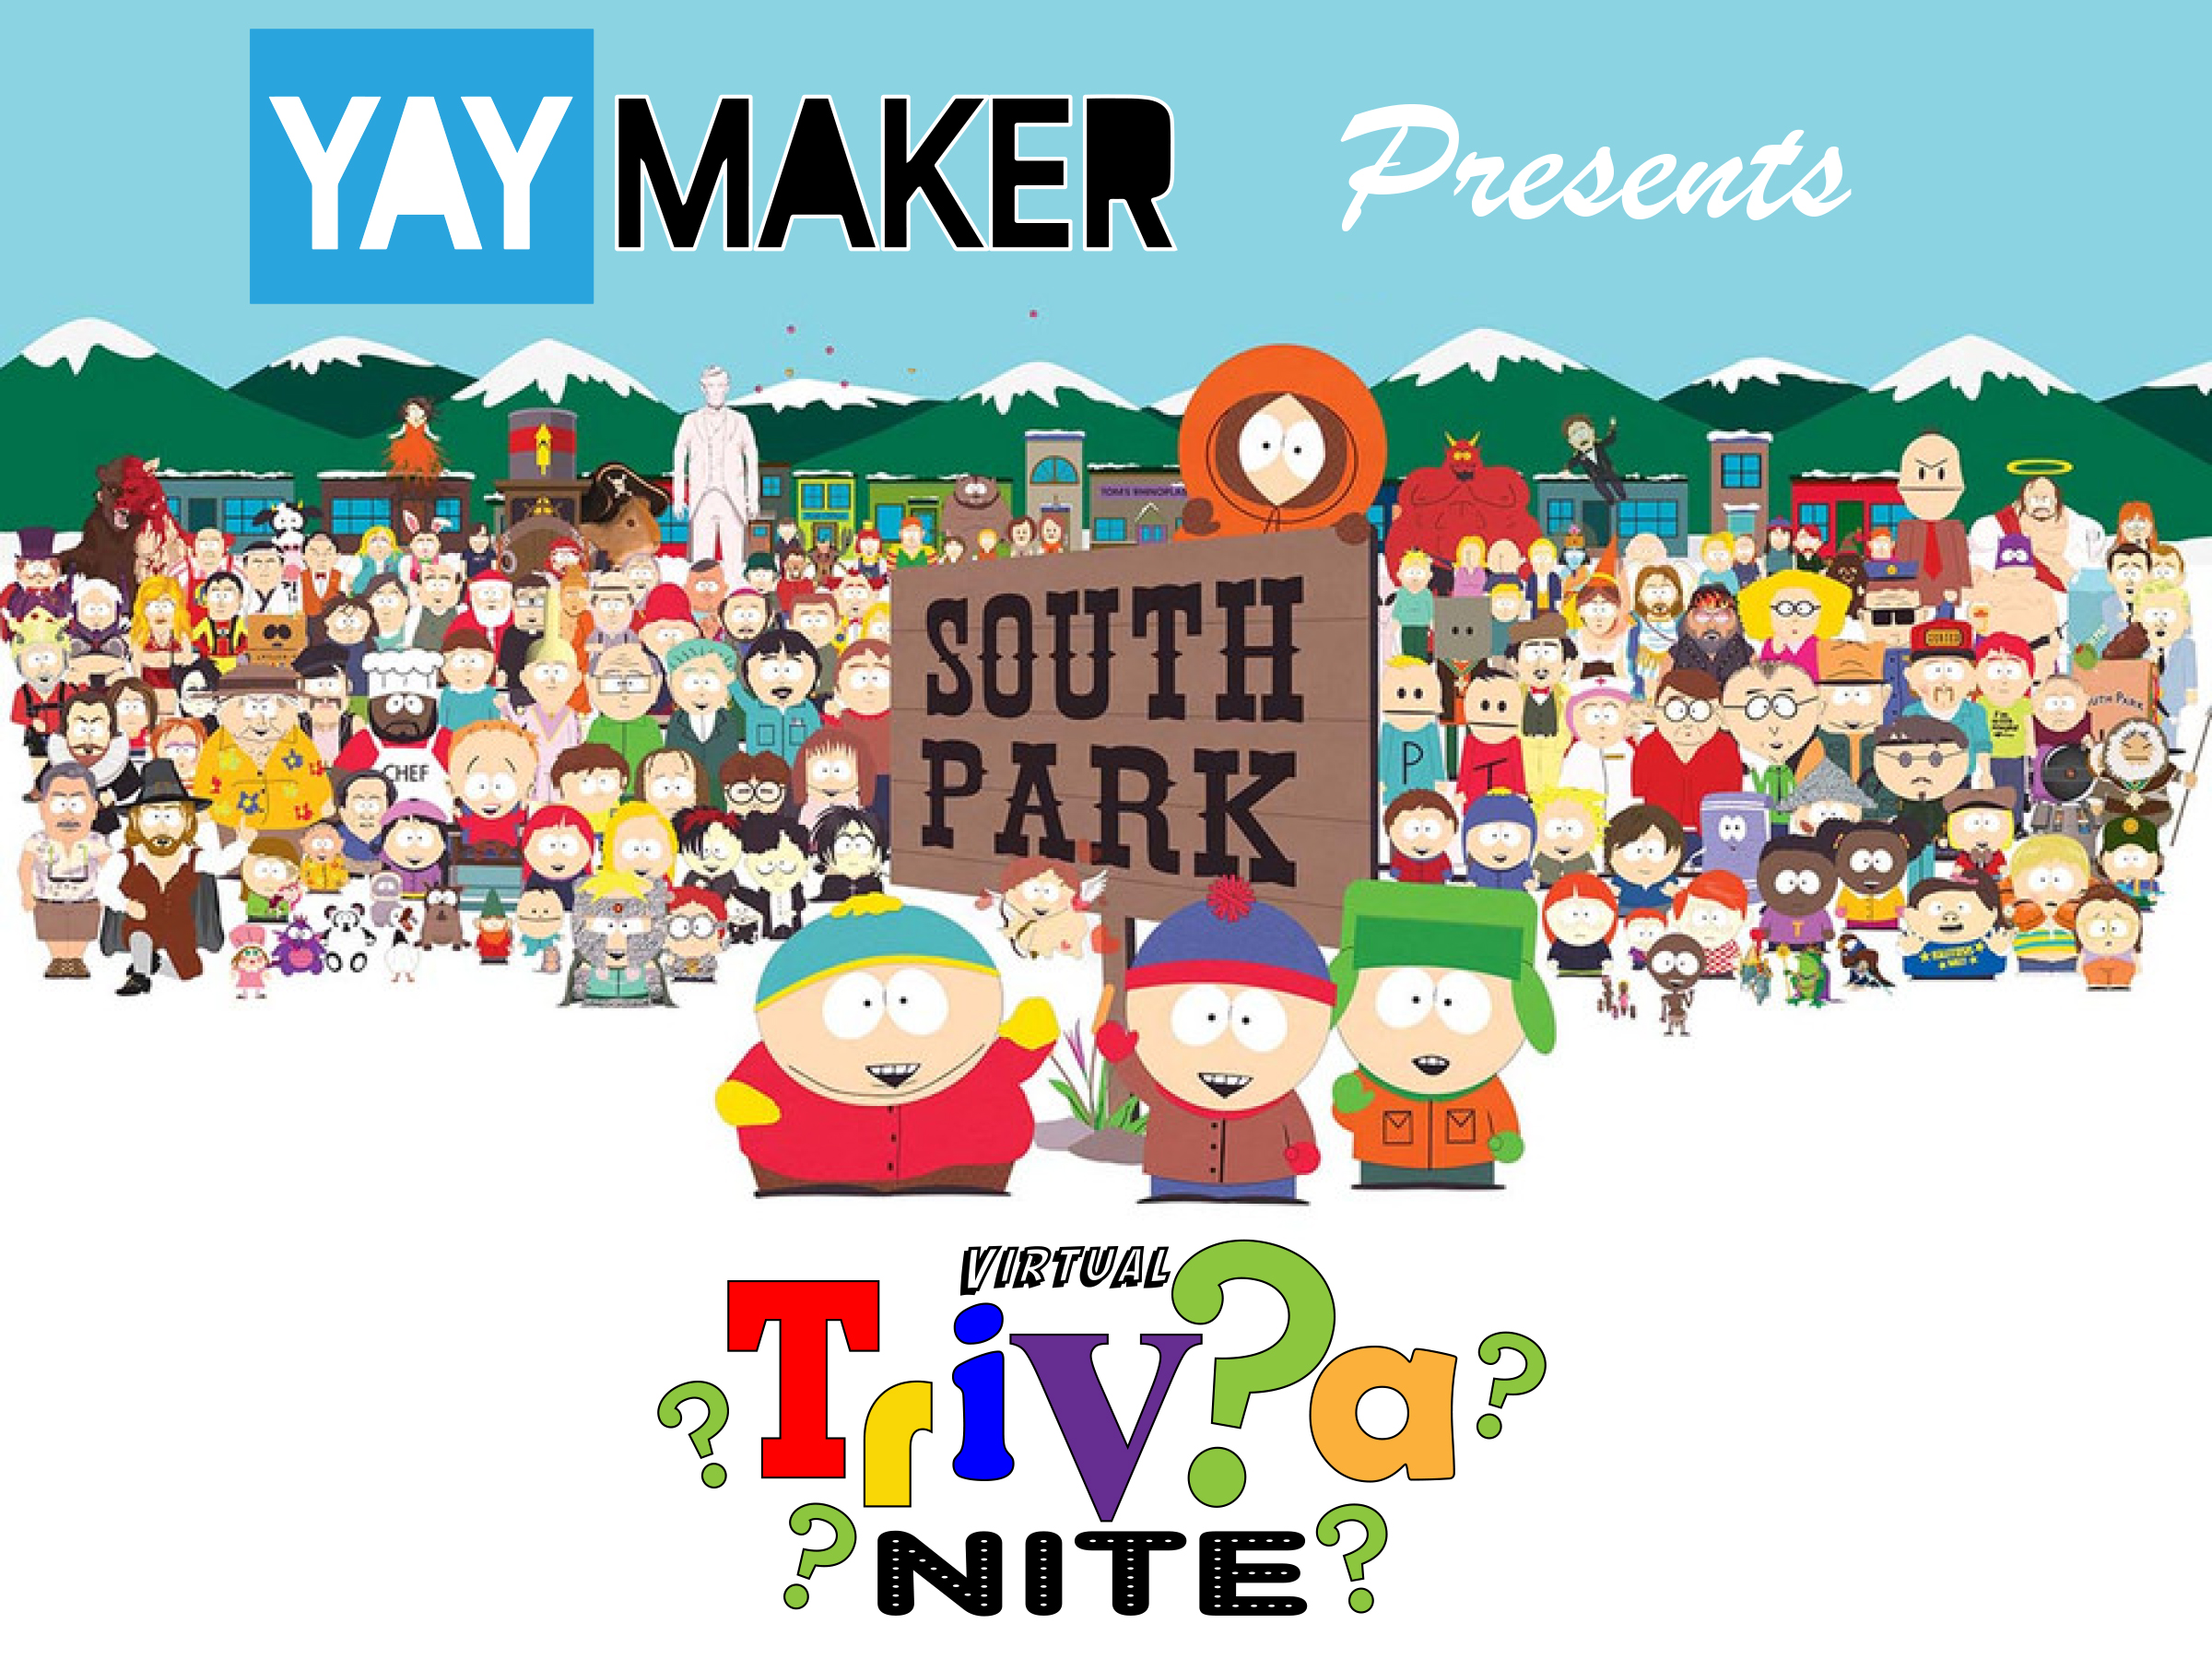 A SOUTH PARK TRIVIA NITE experience project by Yaymaker